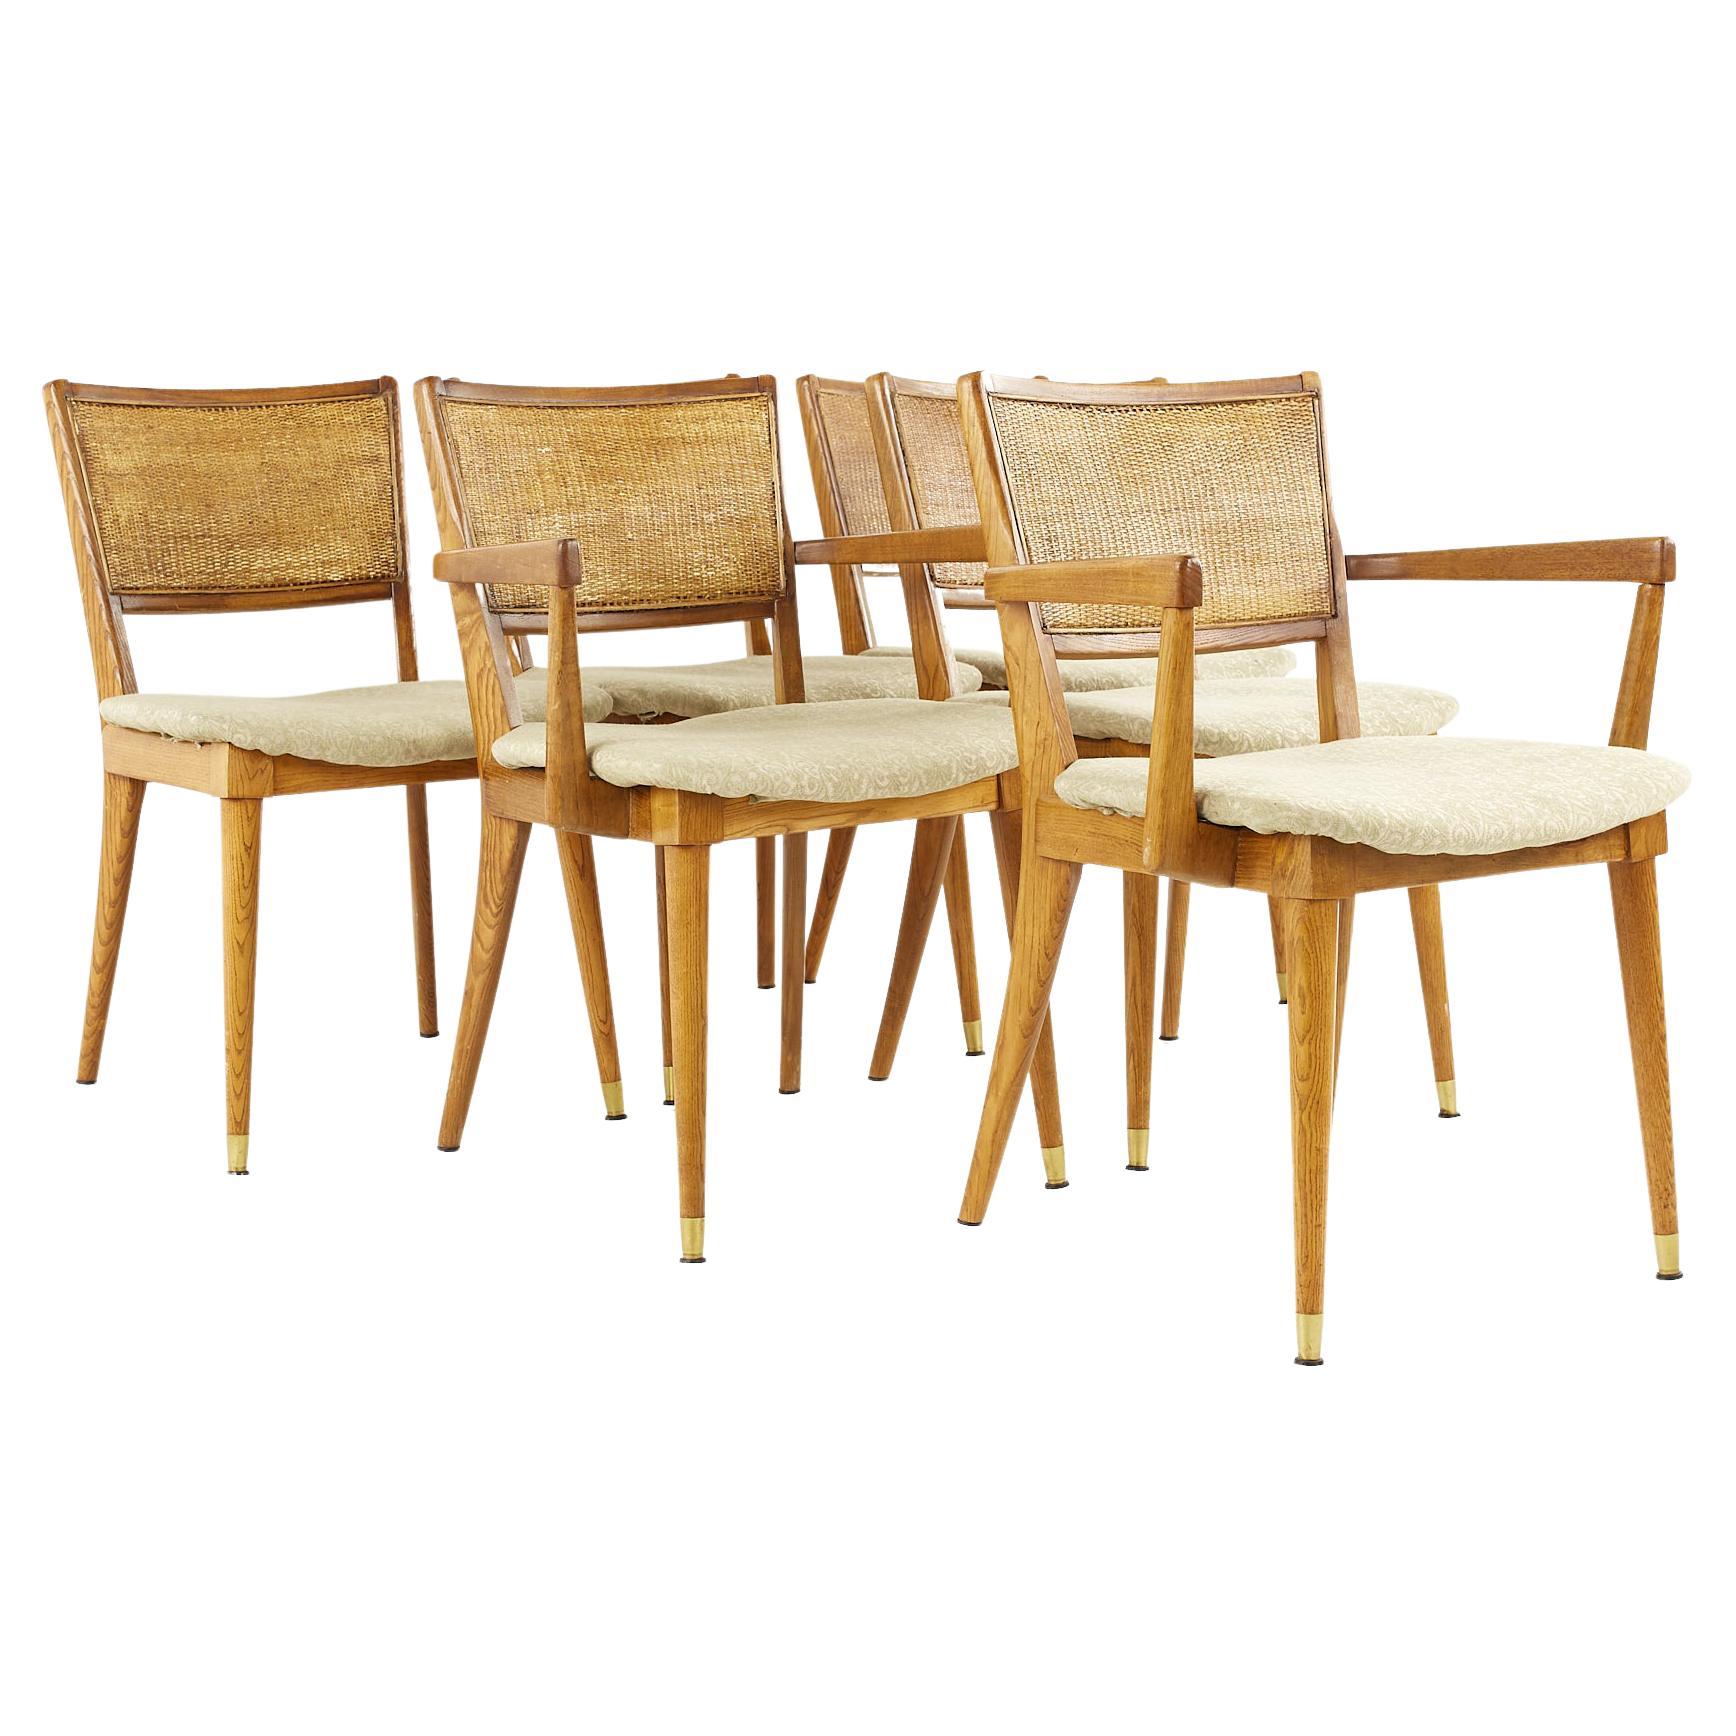 Greta Grossman for Glen of California Mid Century Caned Dining Chairs, Set of 6